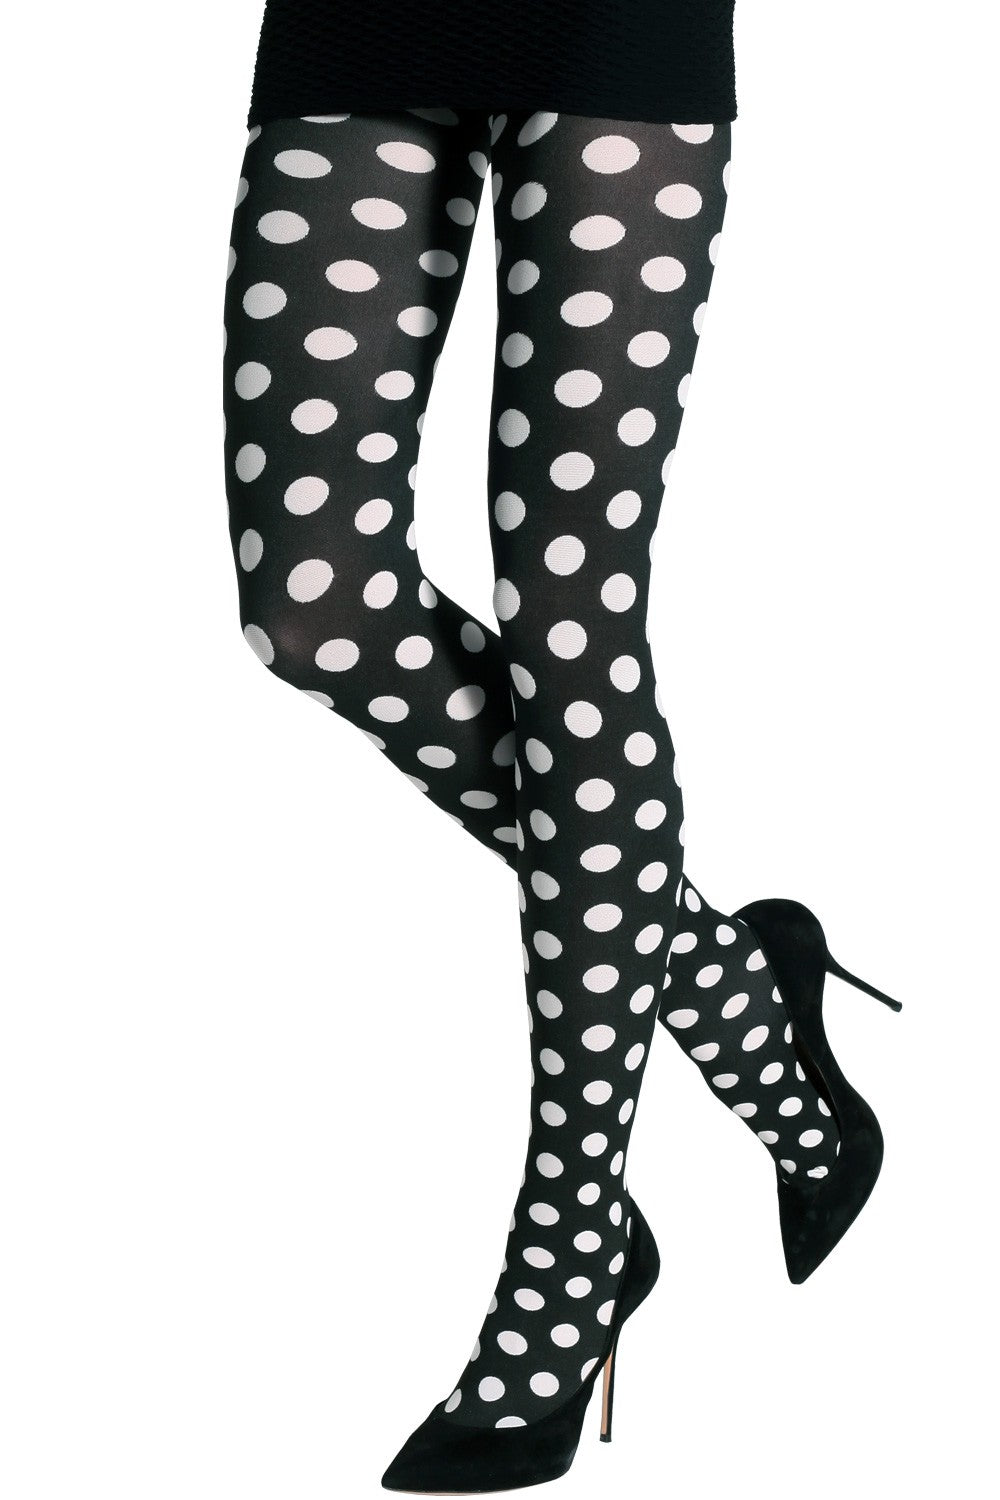 Emilio Cavallini Two Toned Medium Dots Tights - black opaque tights with white polka dots